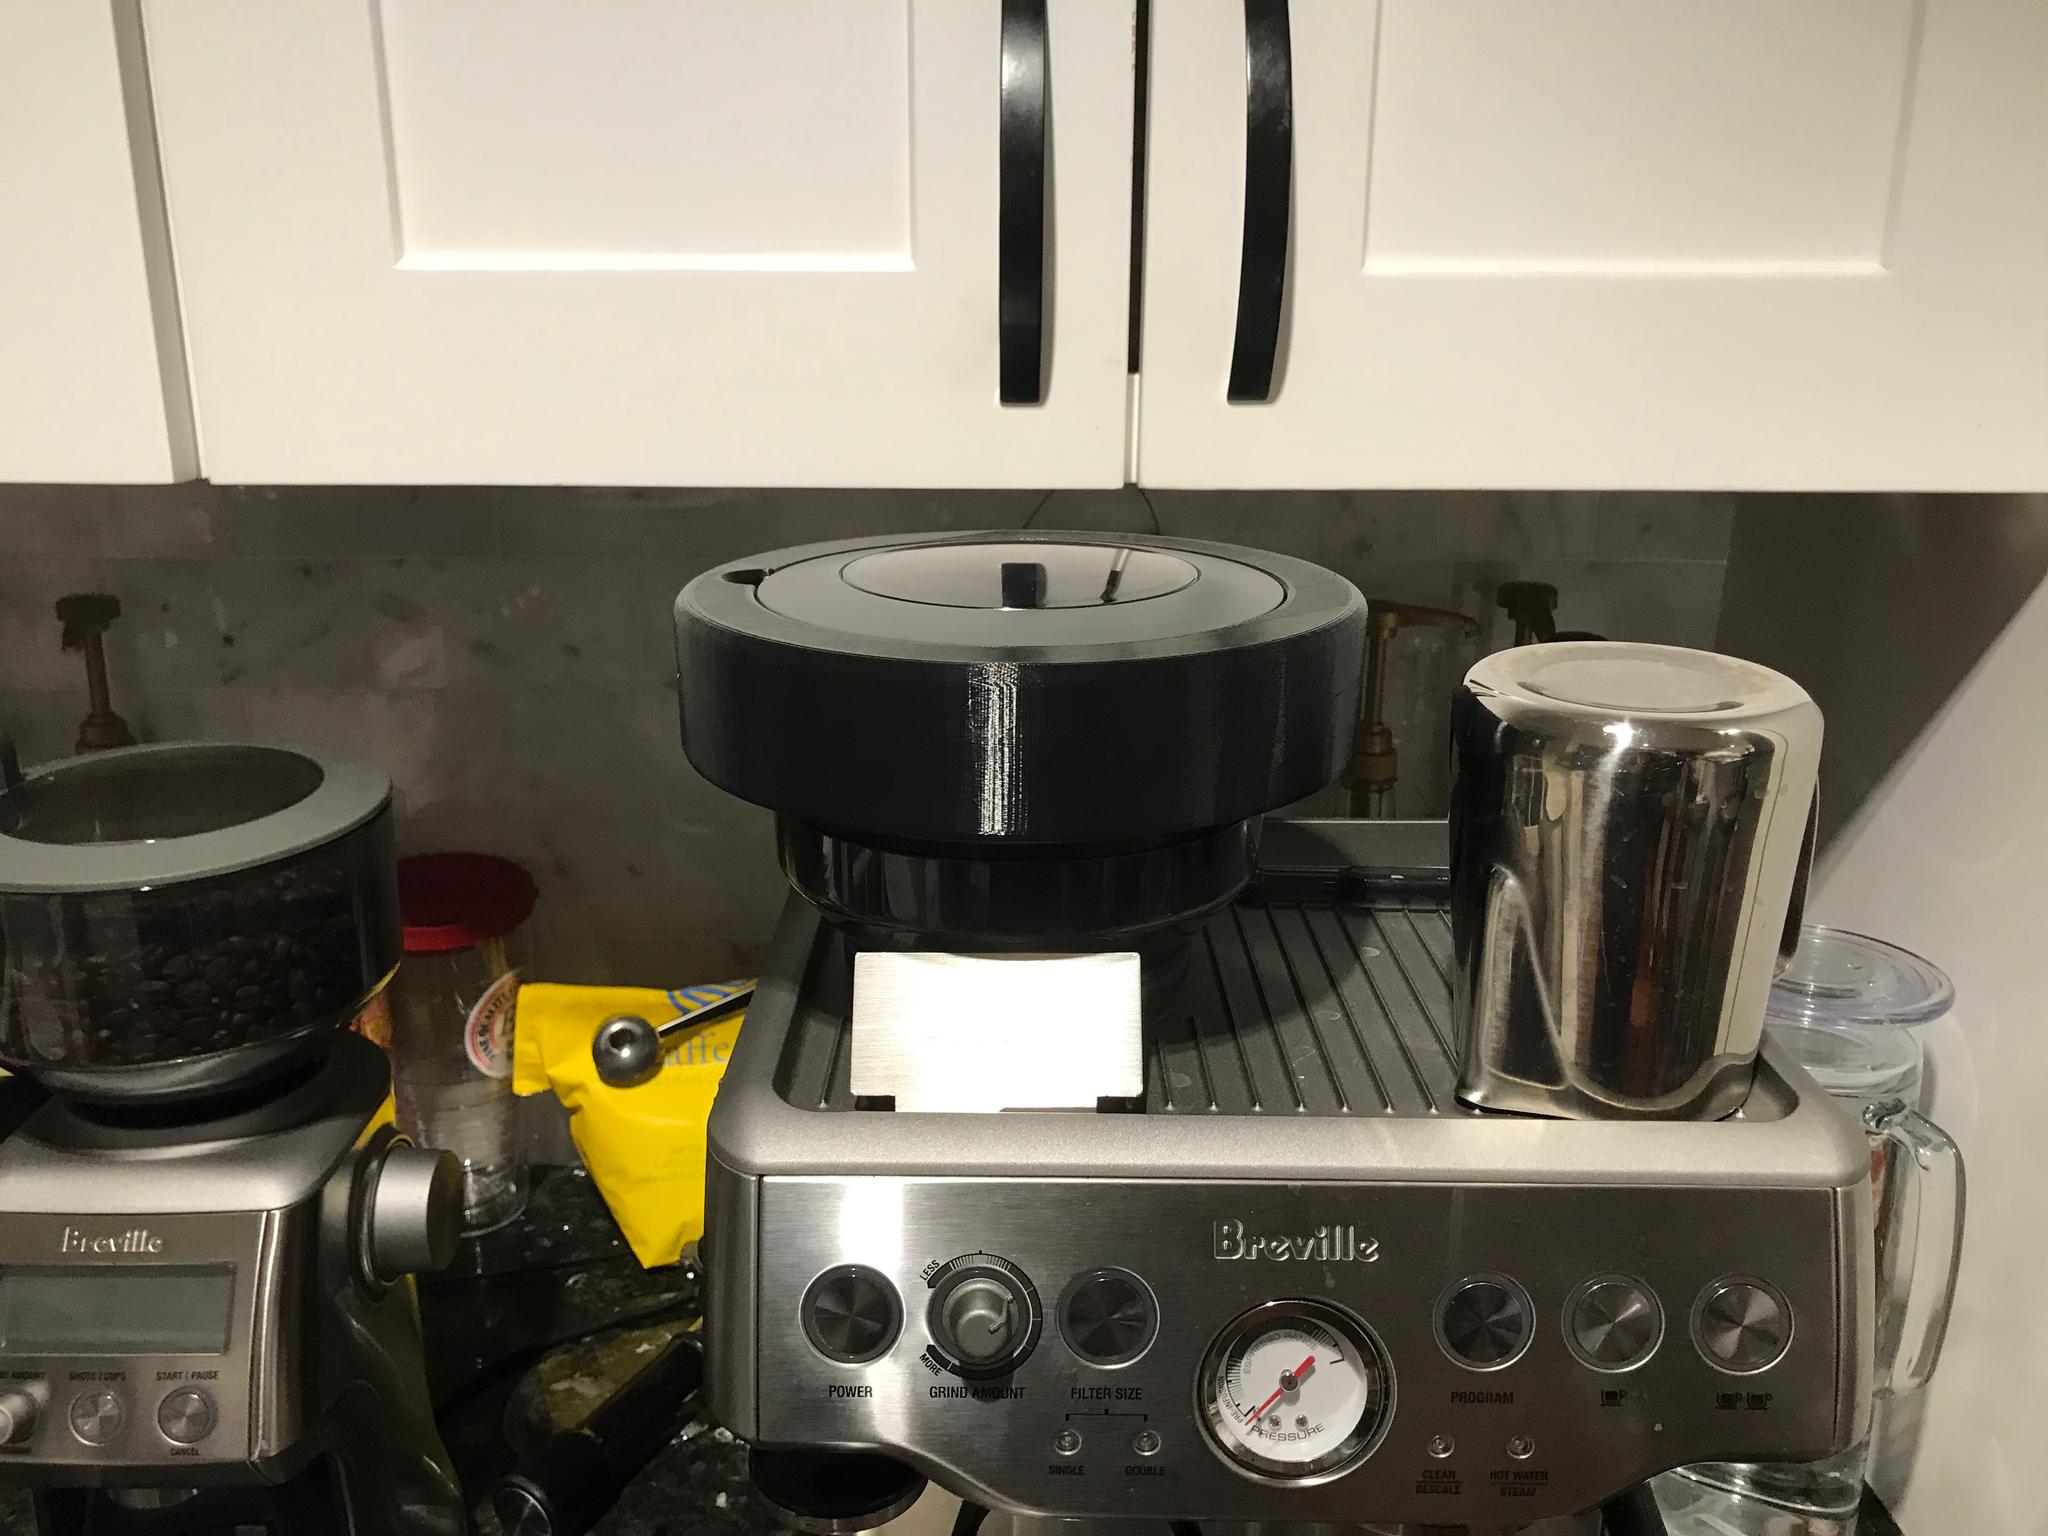 Hopper with lid on Breville machine.